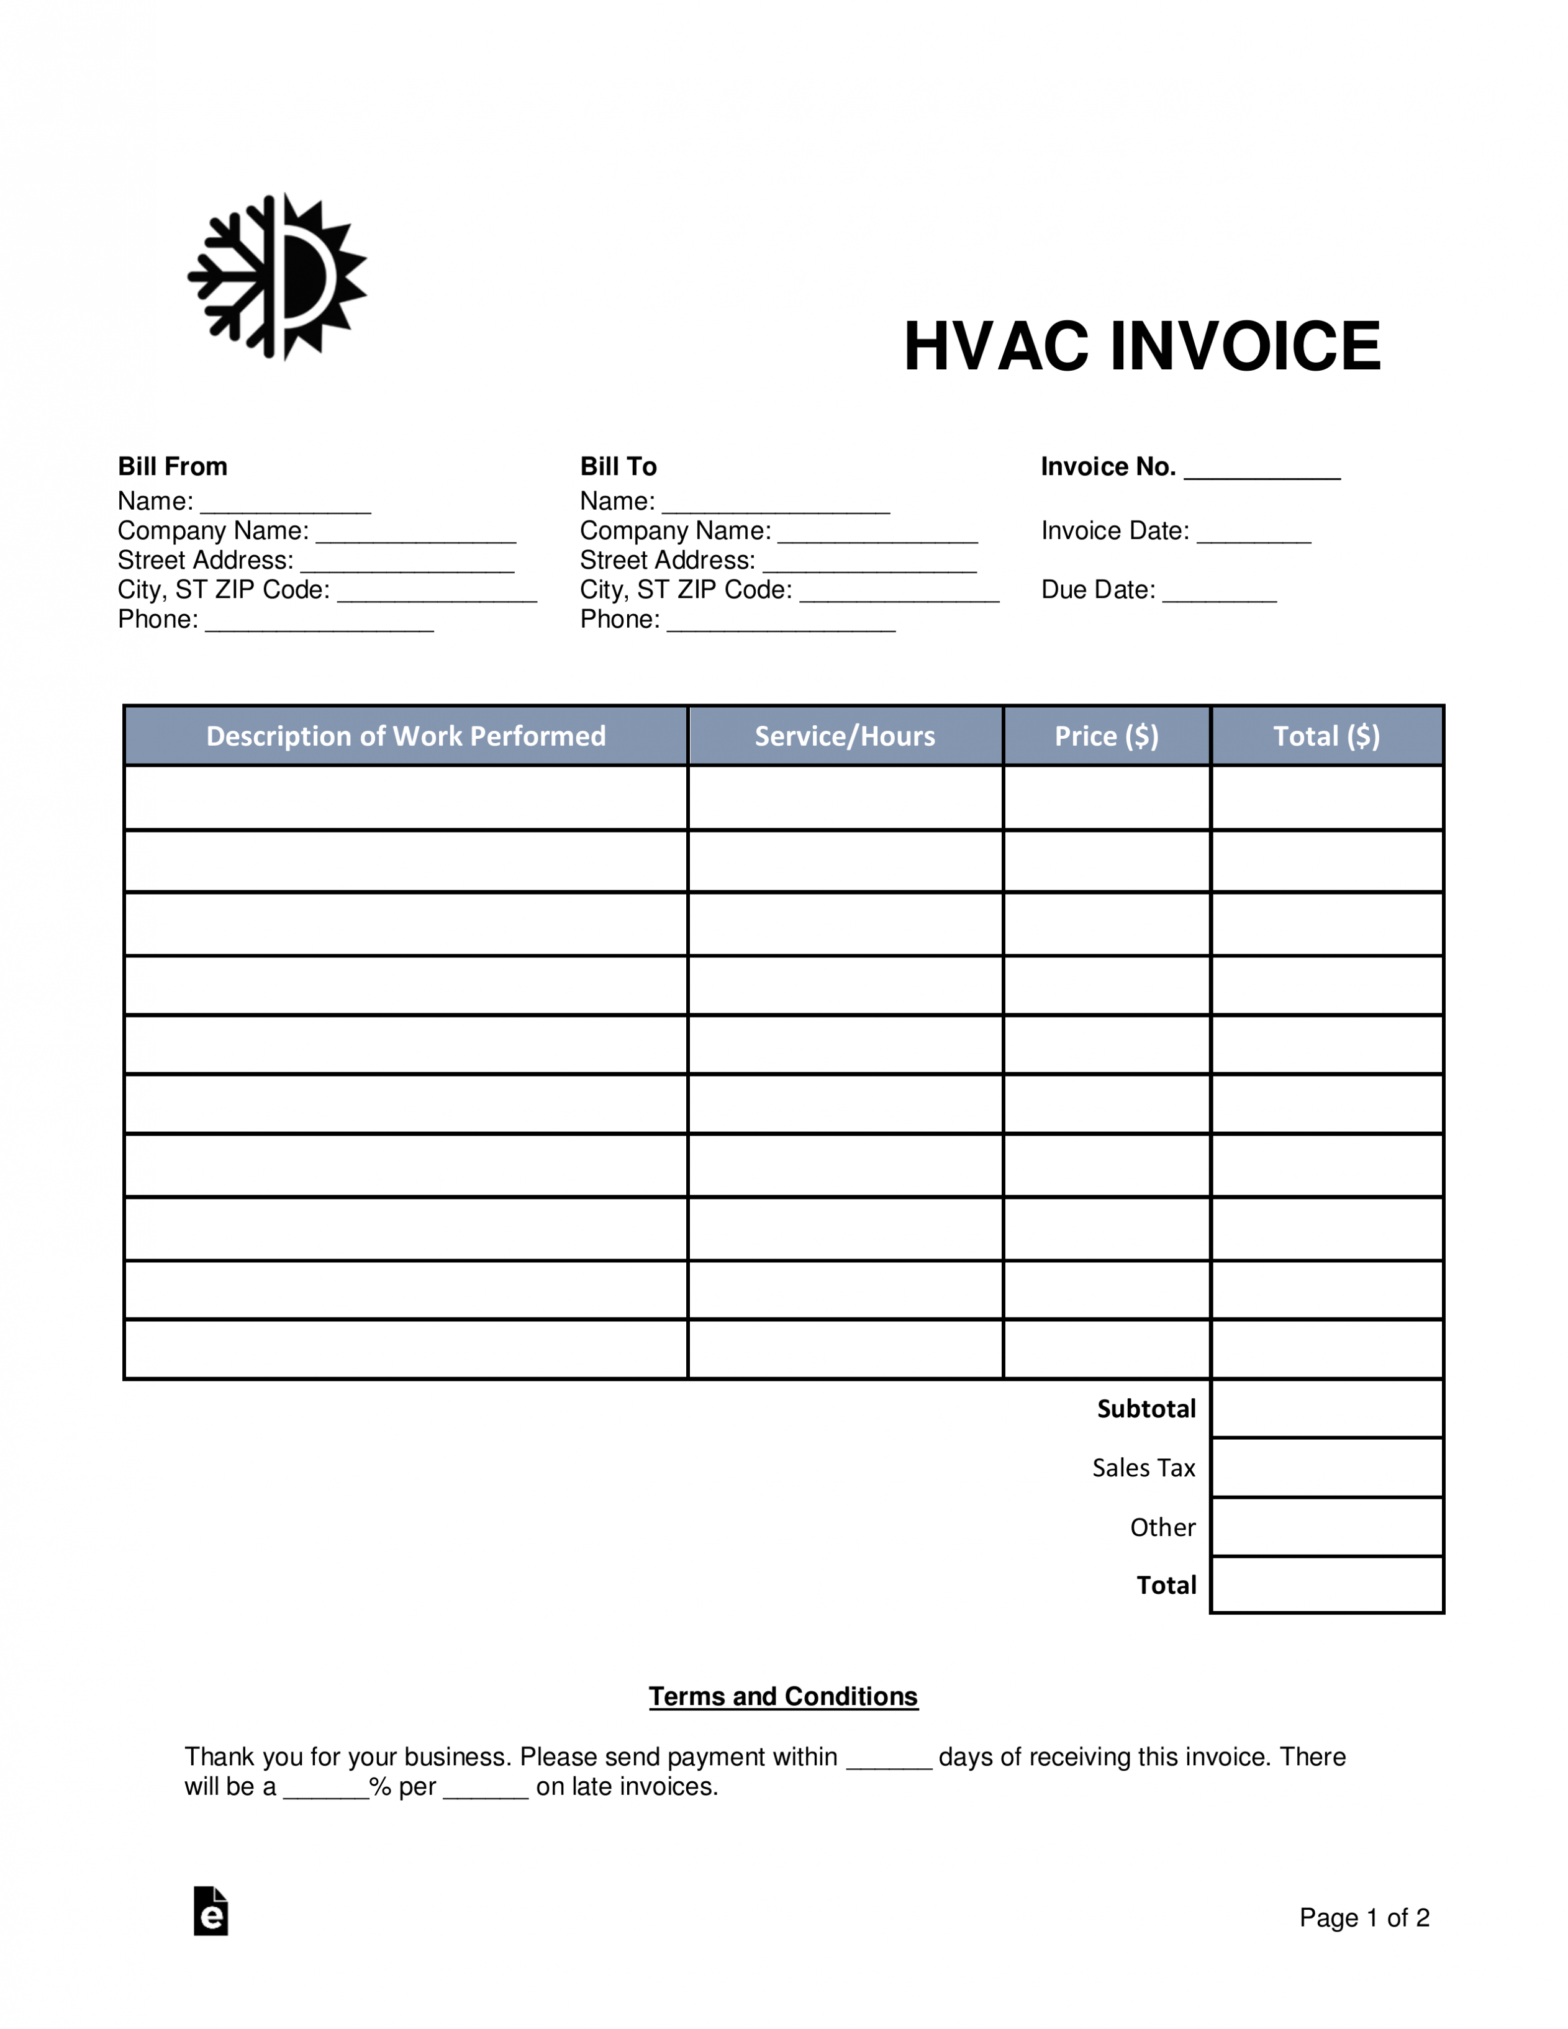 Free Hvac Invoice Template - Word | Pdf | Eforms throughout Air Conditioning Invoice Template